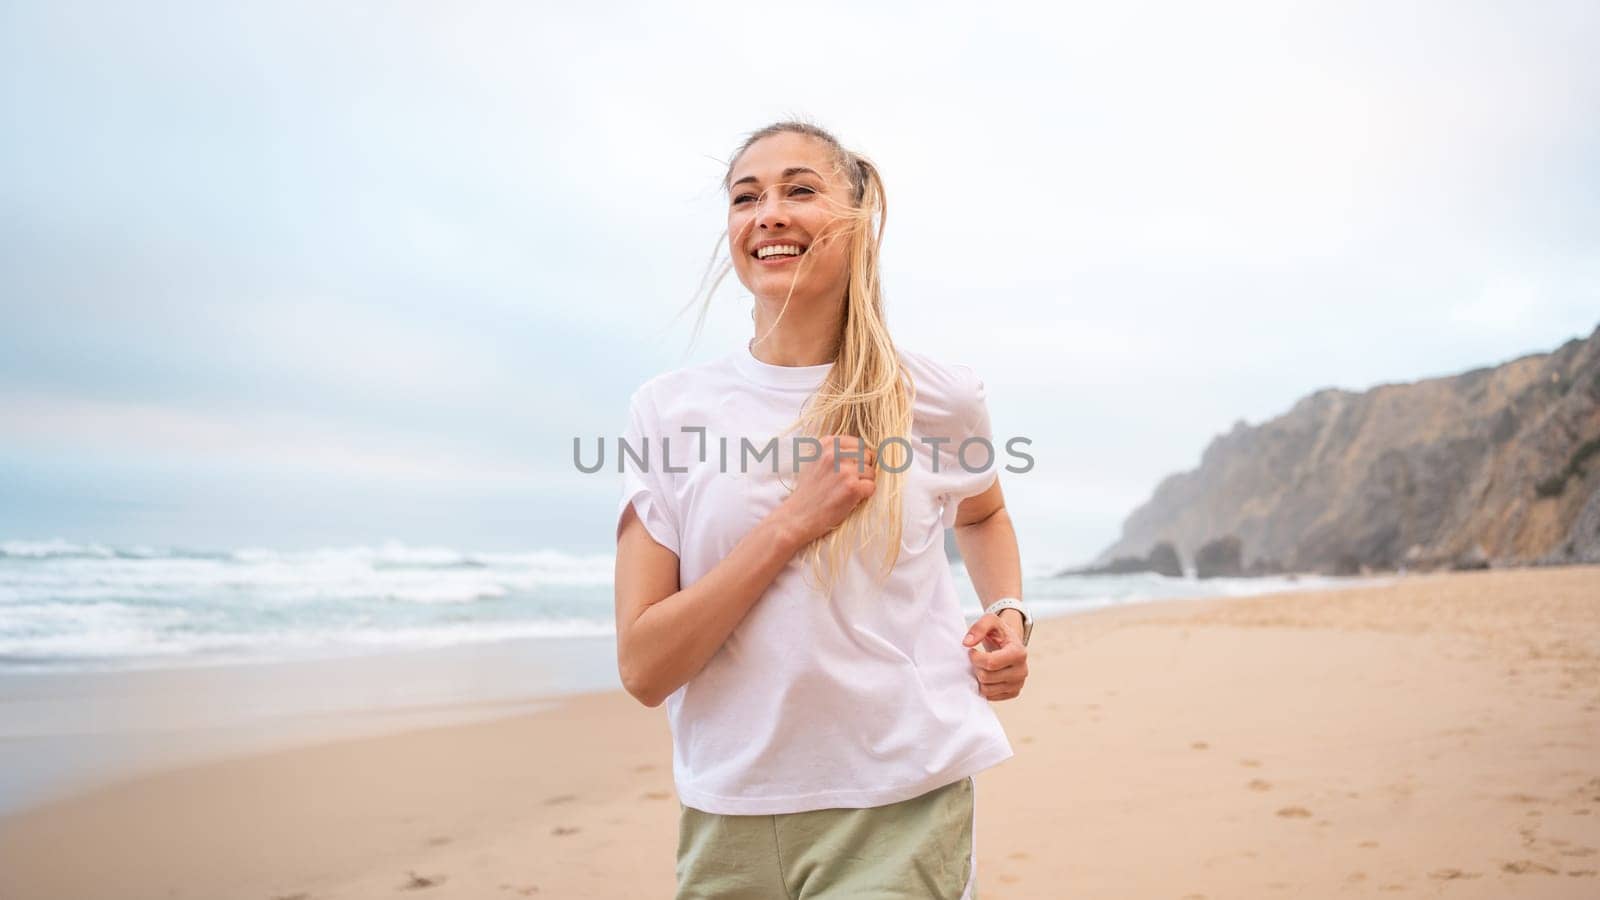 Smiling young woman runner with blond hair in white top jogging on sandy beach. Cheerful female athlete jogging along sea under sky. Happy girl represents healthy lifestyle.